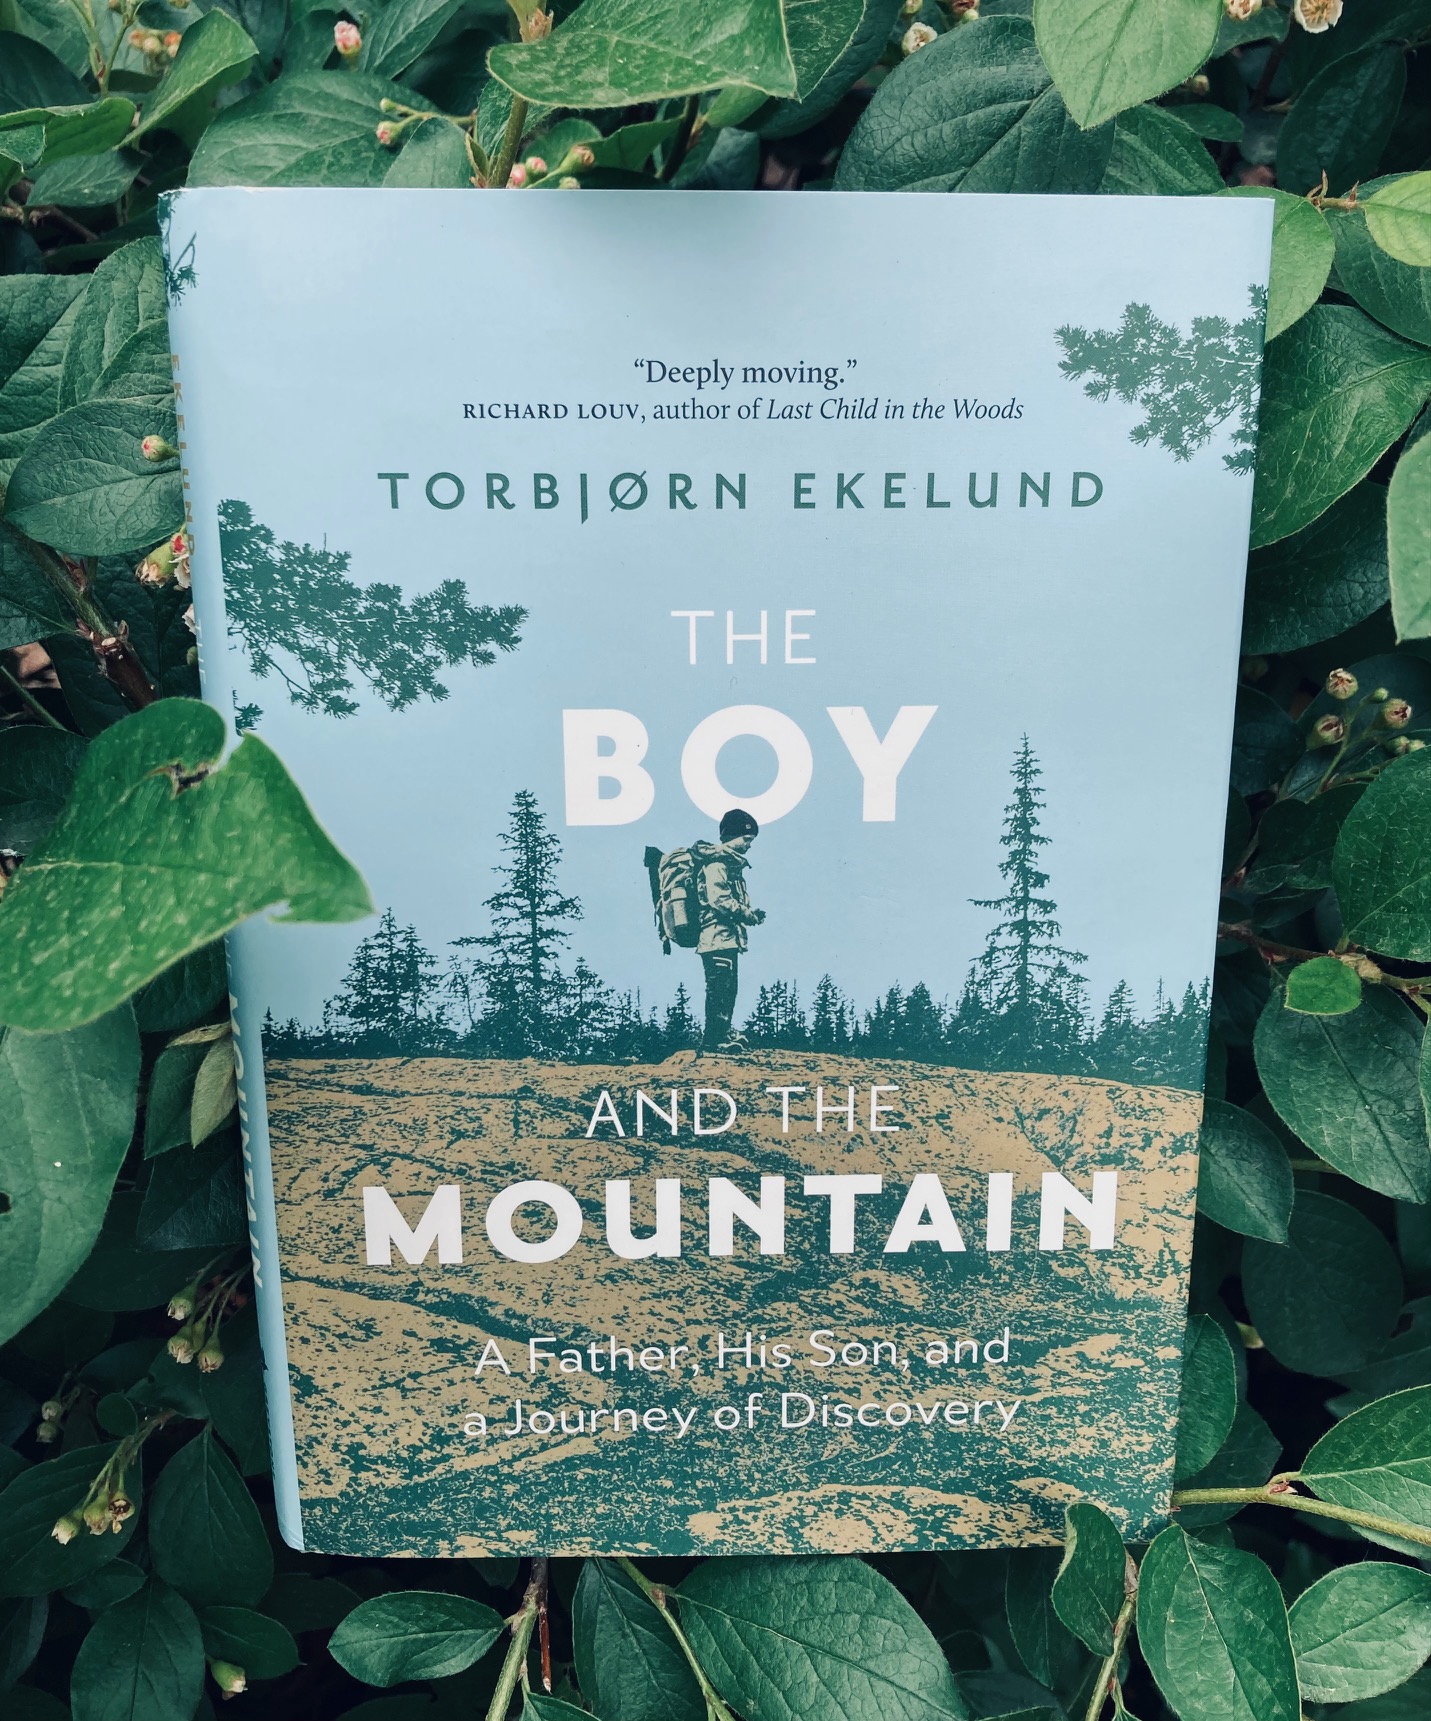 The Boy and the Mountain by Torbjorn Ekelund book pictured on top of green leaves